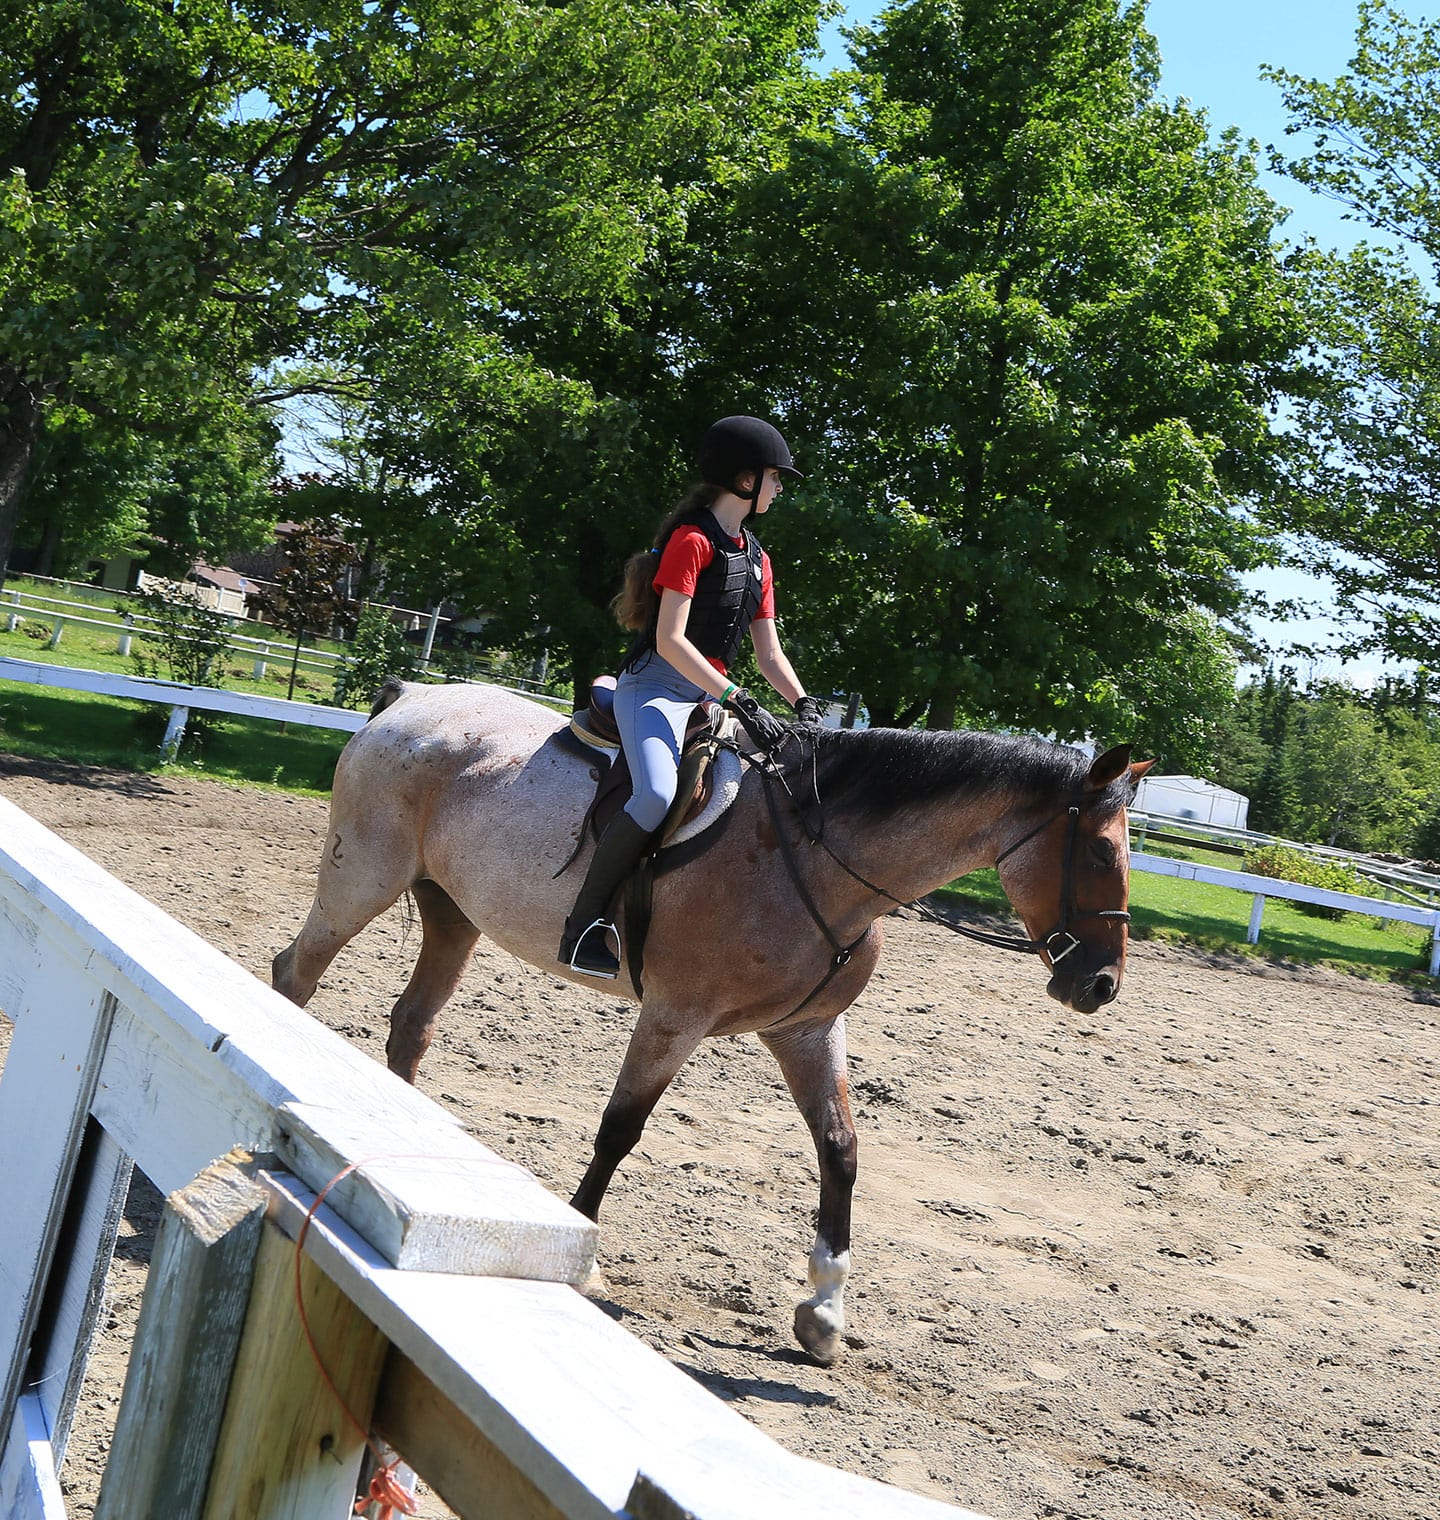 Teen horse riding summer camp in Quebec City